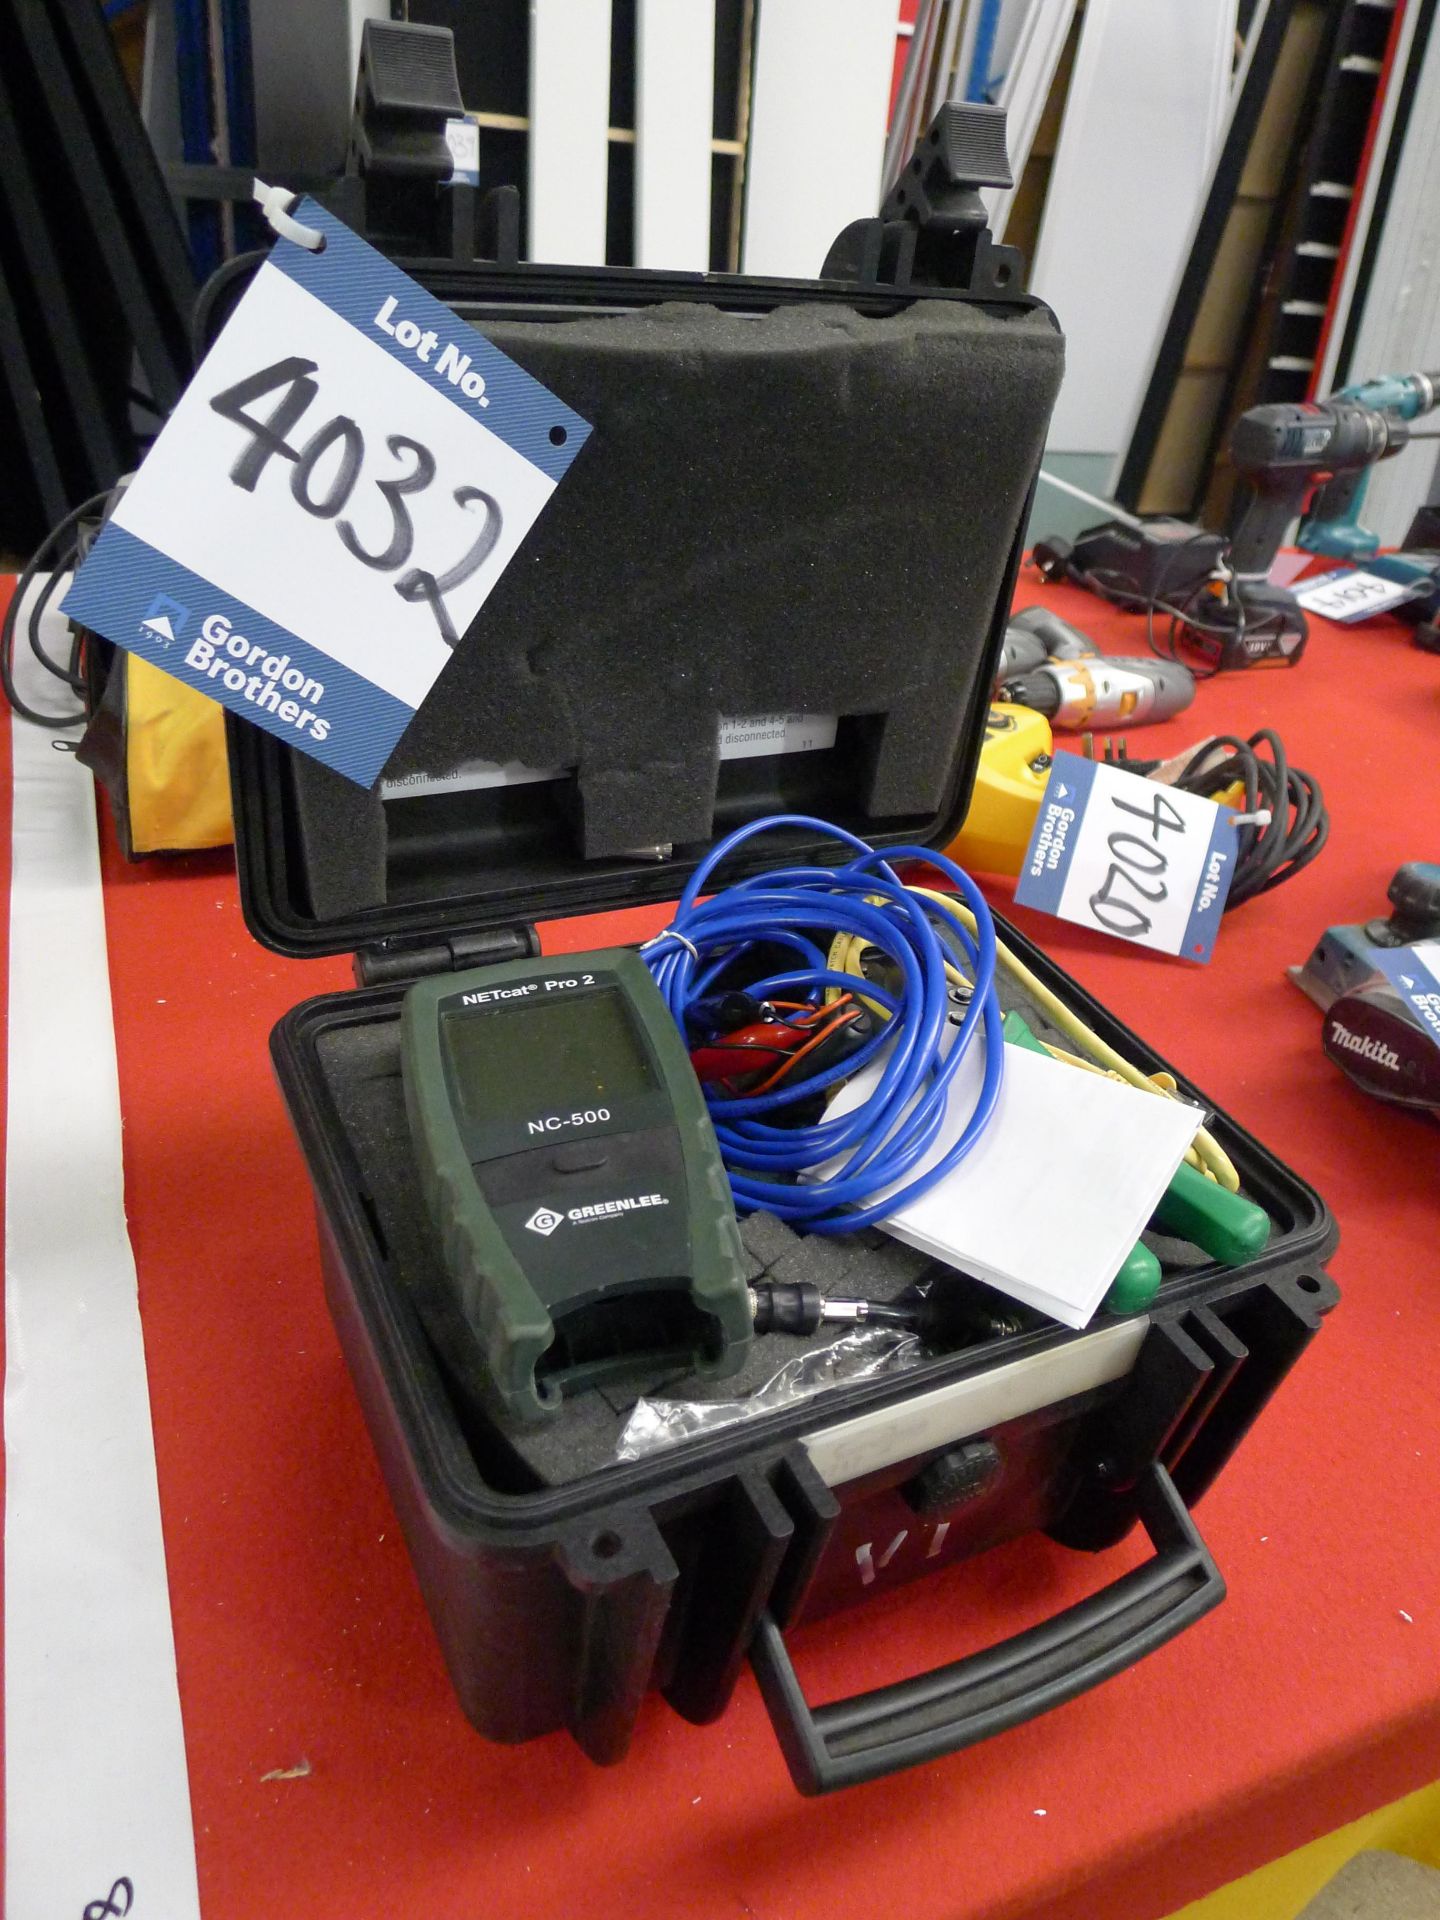 Greenlee NC-500 Netcat Pro Cable Tester: Unit 500,